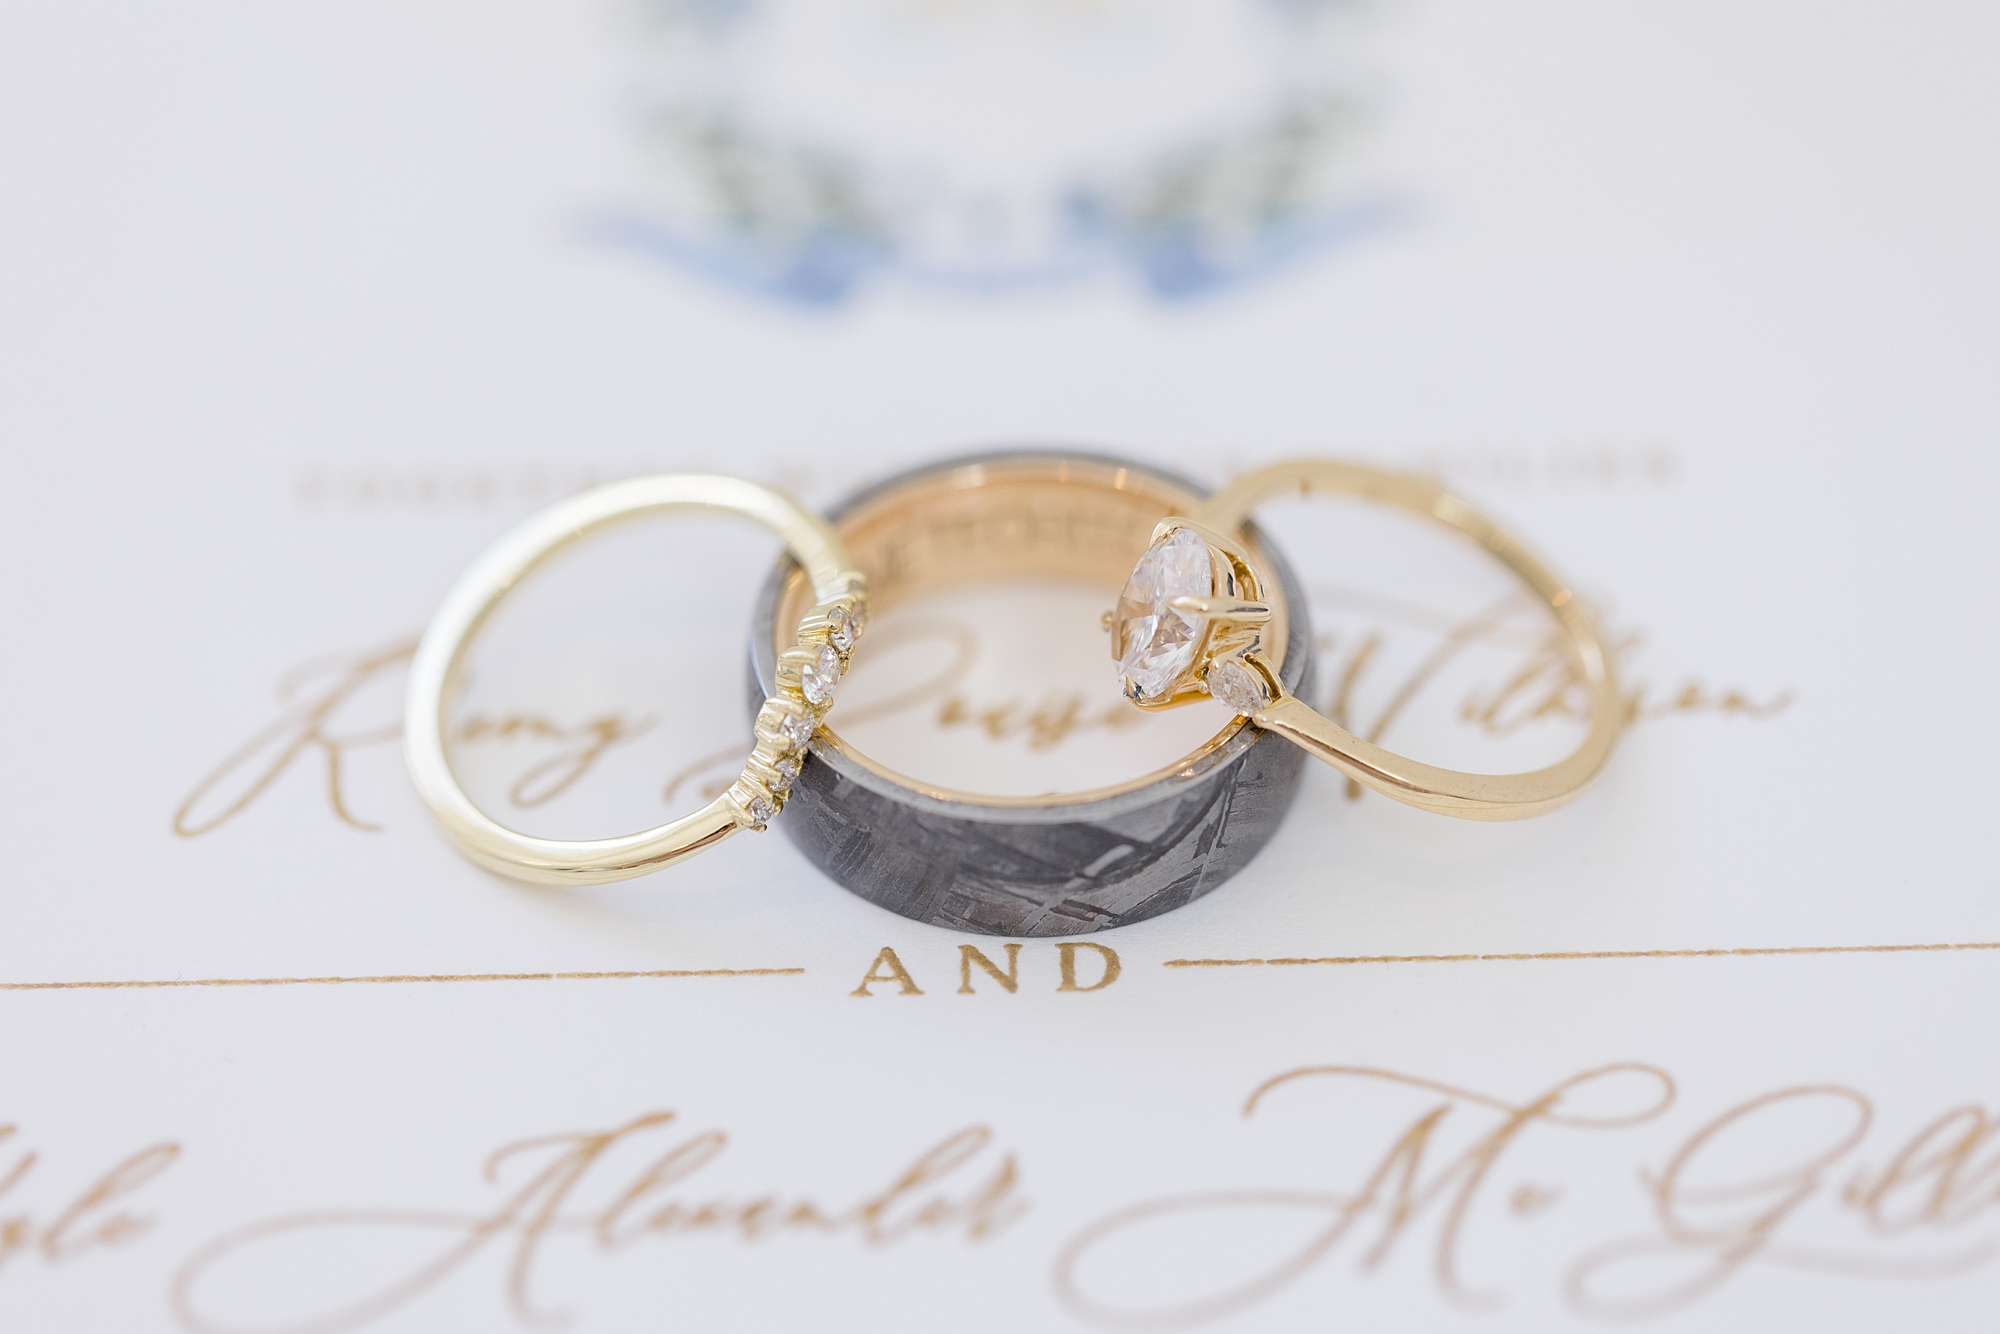 wedding rings rest on classic spring invitation suite